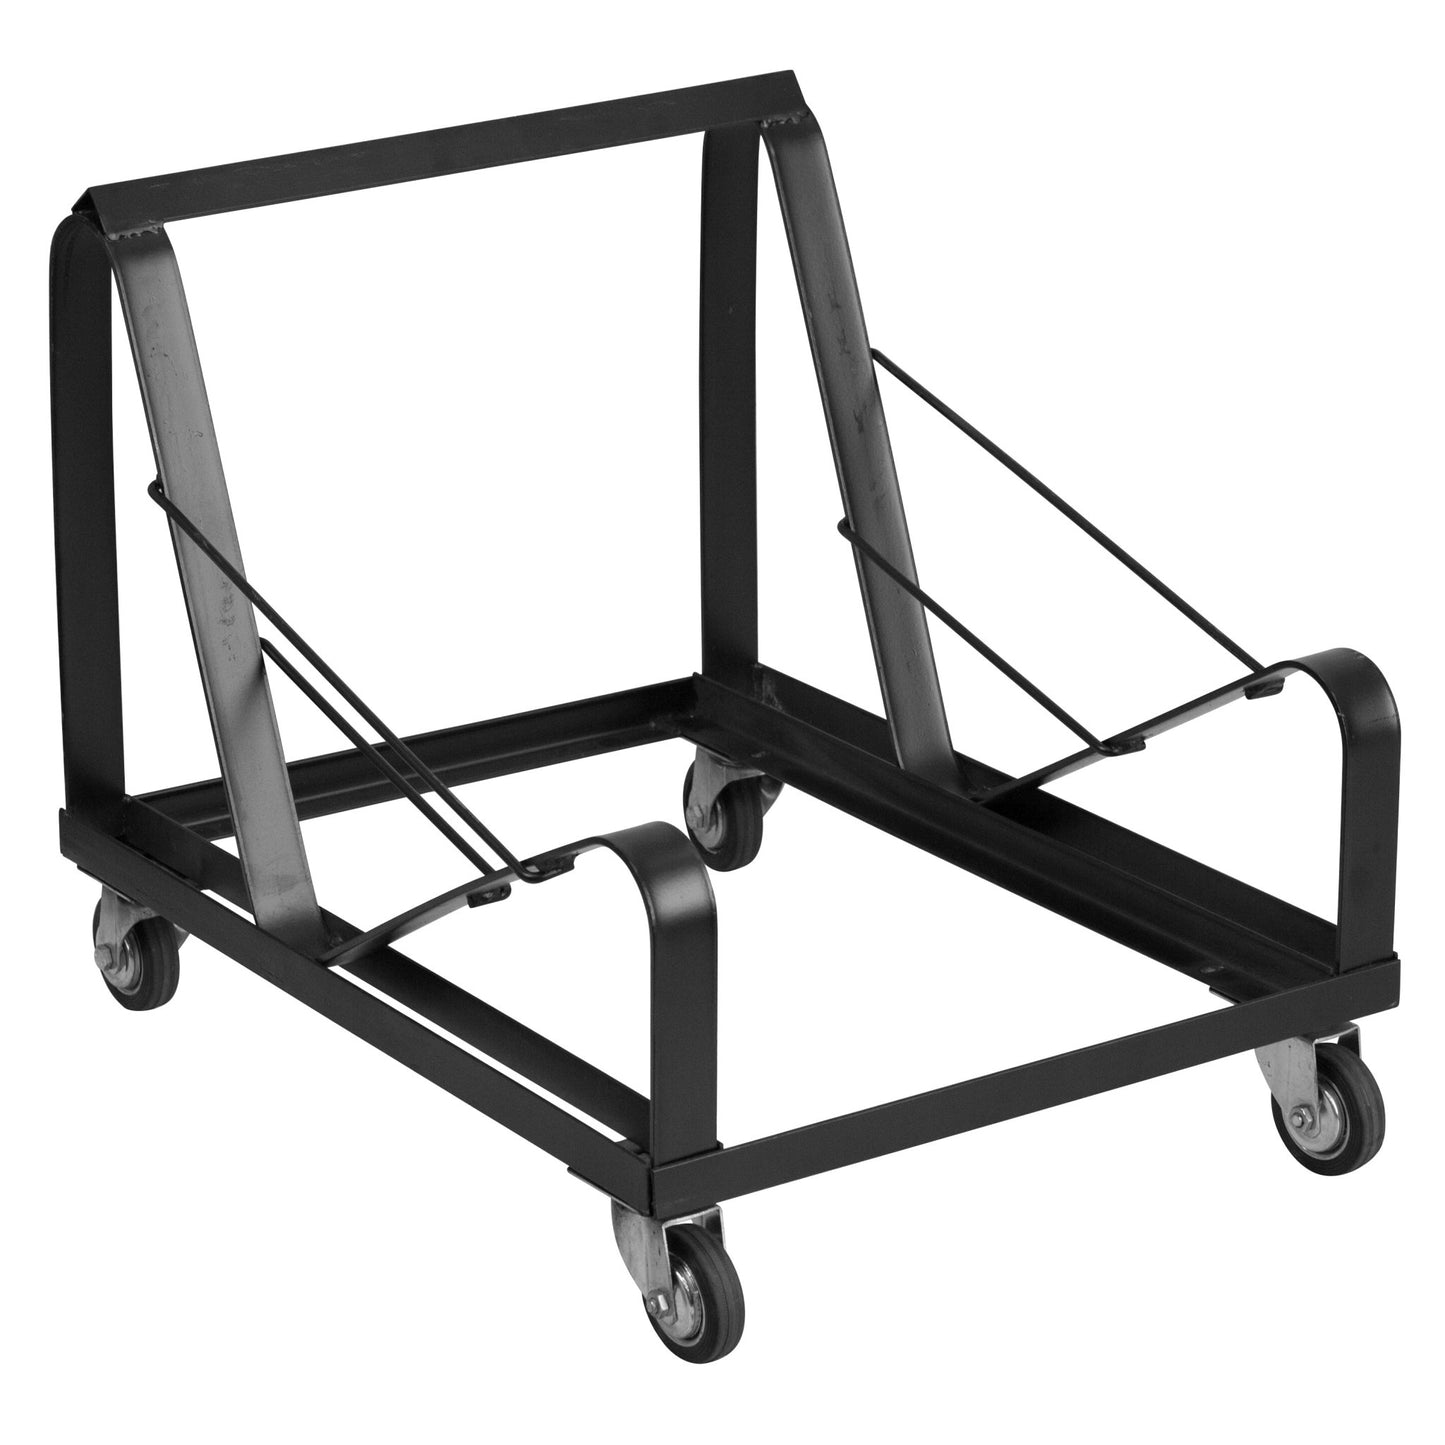 HERCULES Series Black Steel Sled Base Stack Chair Dolly - SchoolOutlet